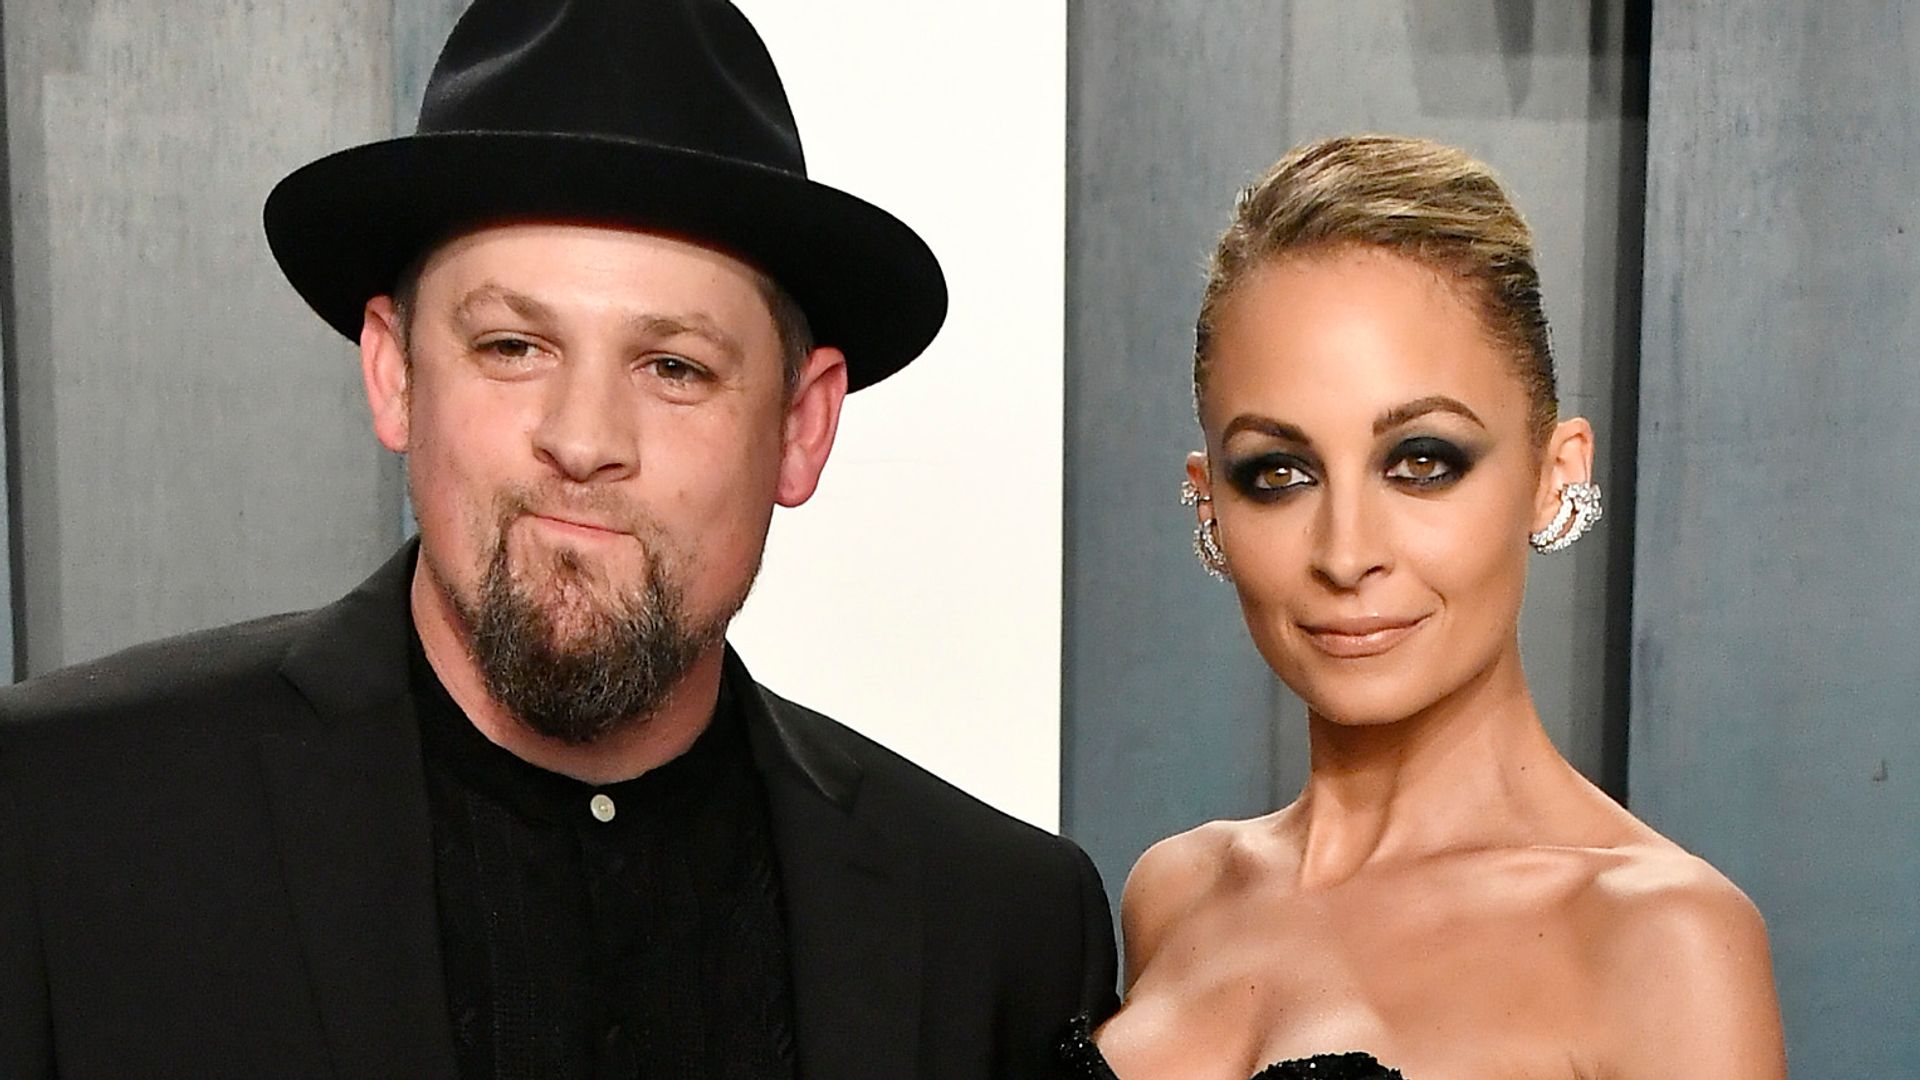 Joel Madden in a black suit and hat with Nicole Richie in a strapless black dress